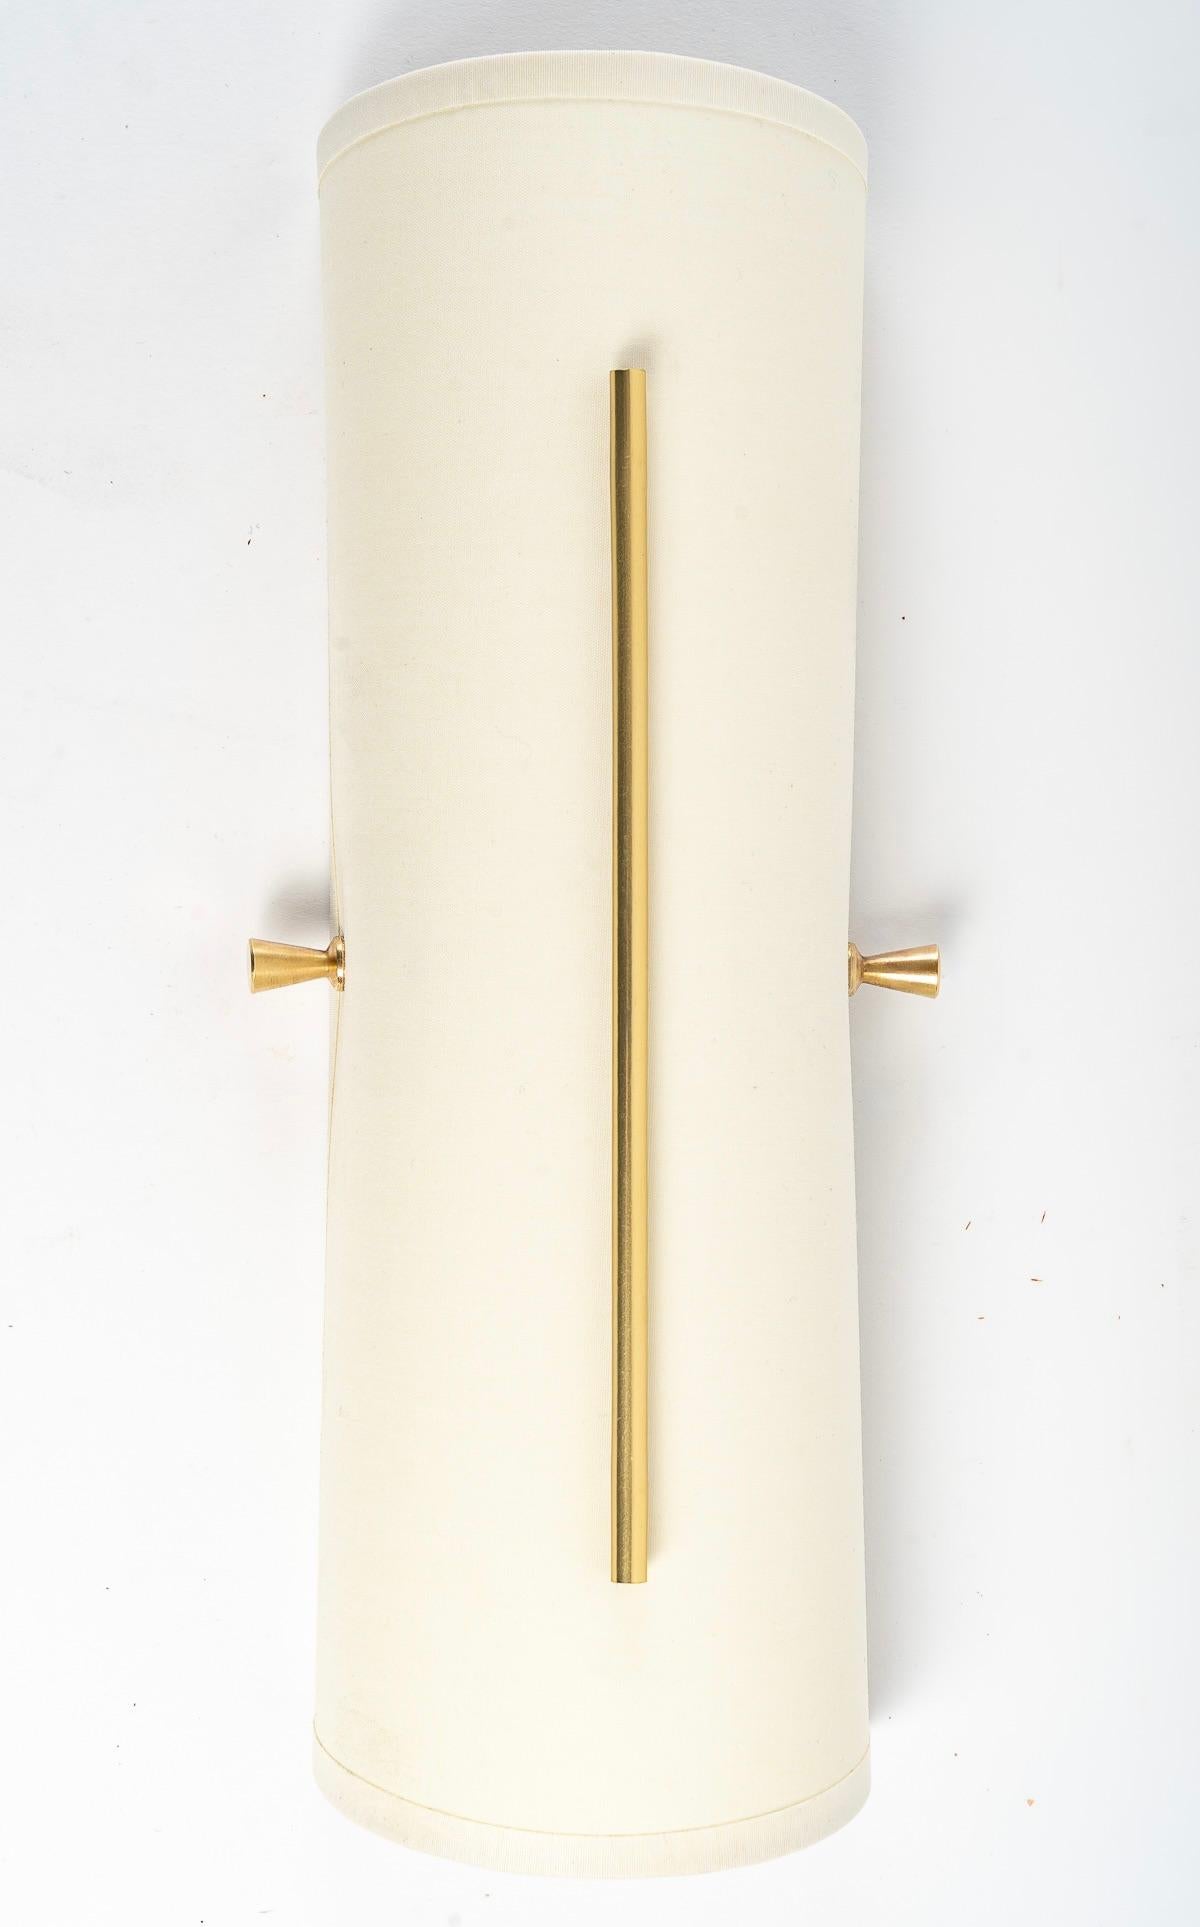 Original pair of sconces 
.
Composed of a half cylinder in off-white cotton positioned in height and maintained by two small spinning tops in gold brass positioned on each side of the sconce has put height. 
It is decorated on the front of the half